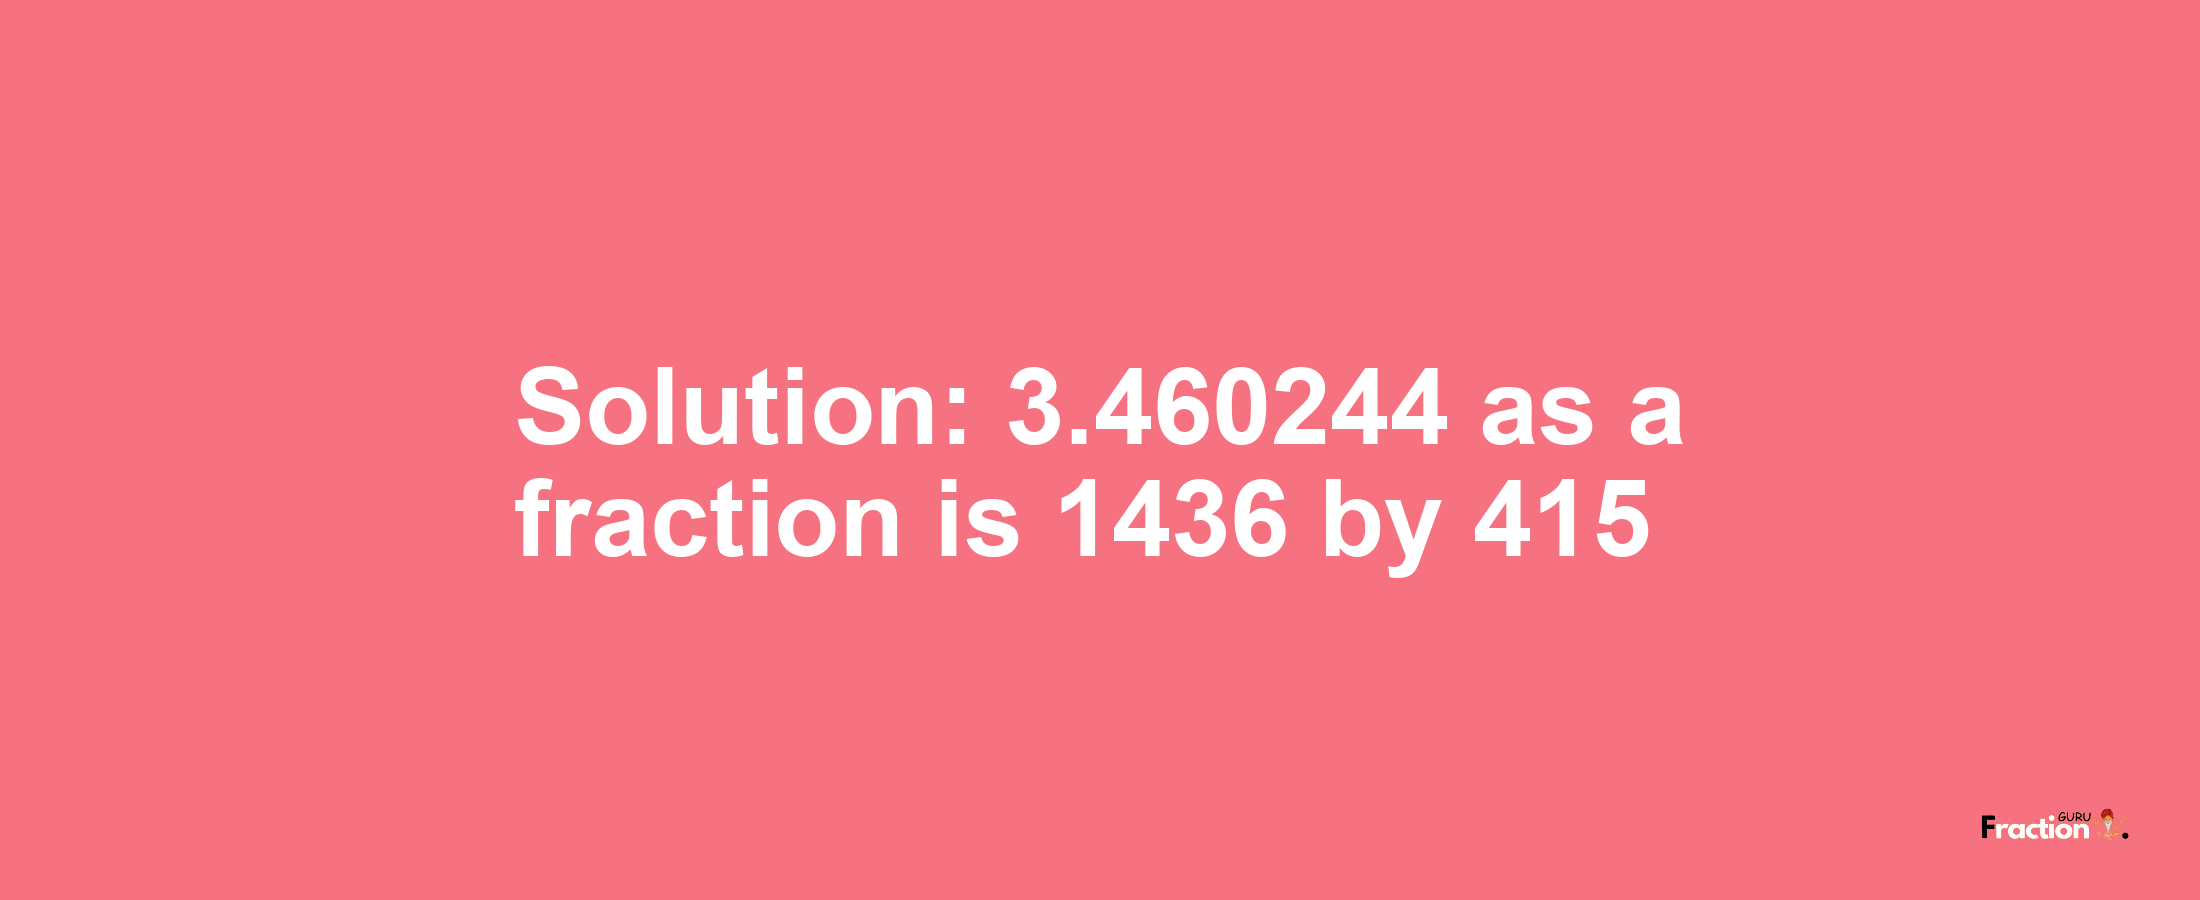 Solution:3.460244 as a fraction is 1436/415